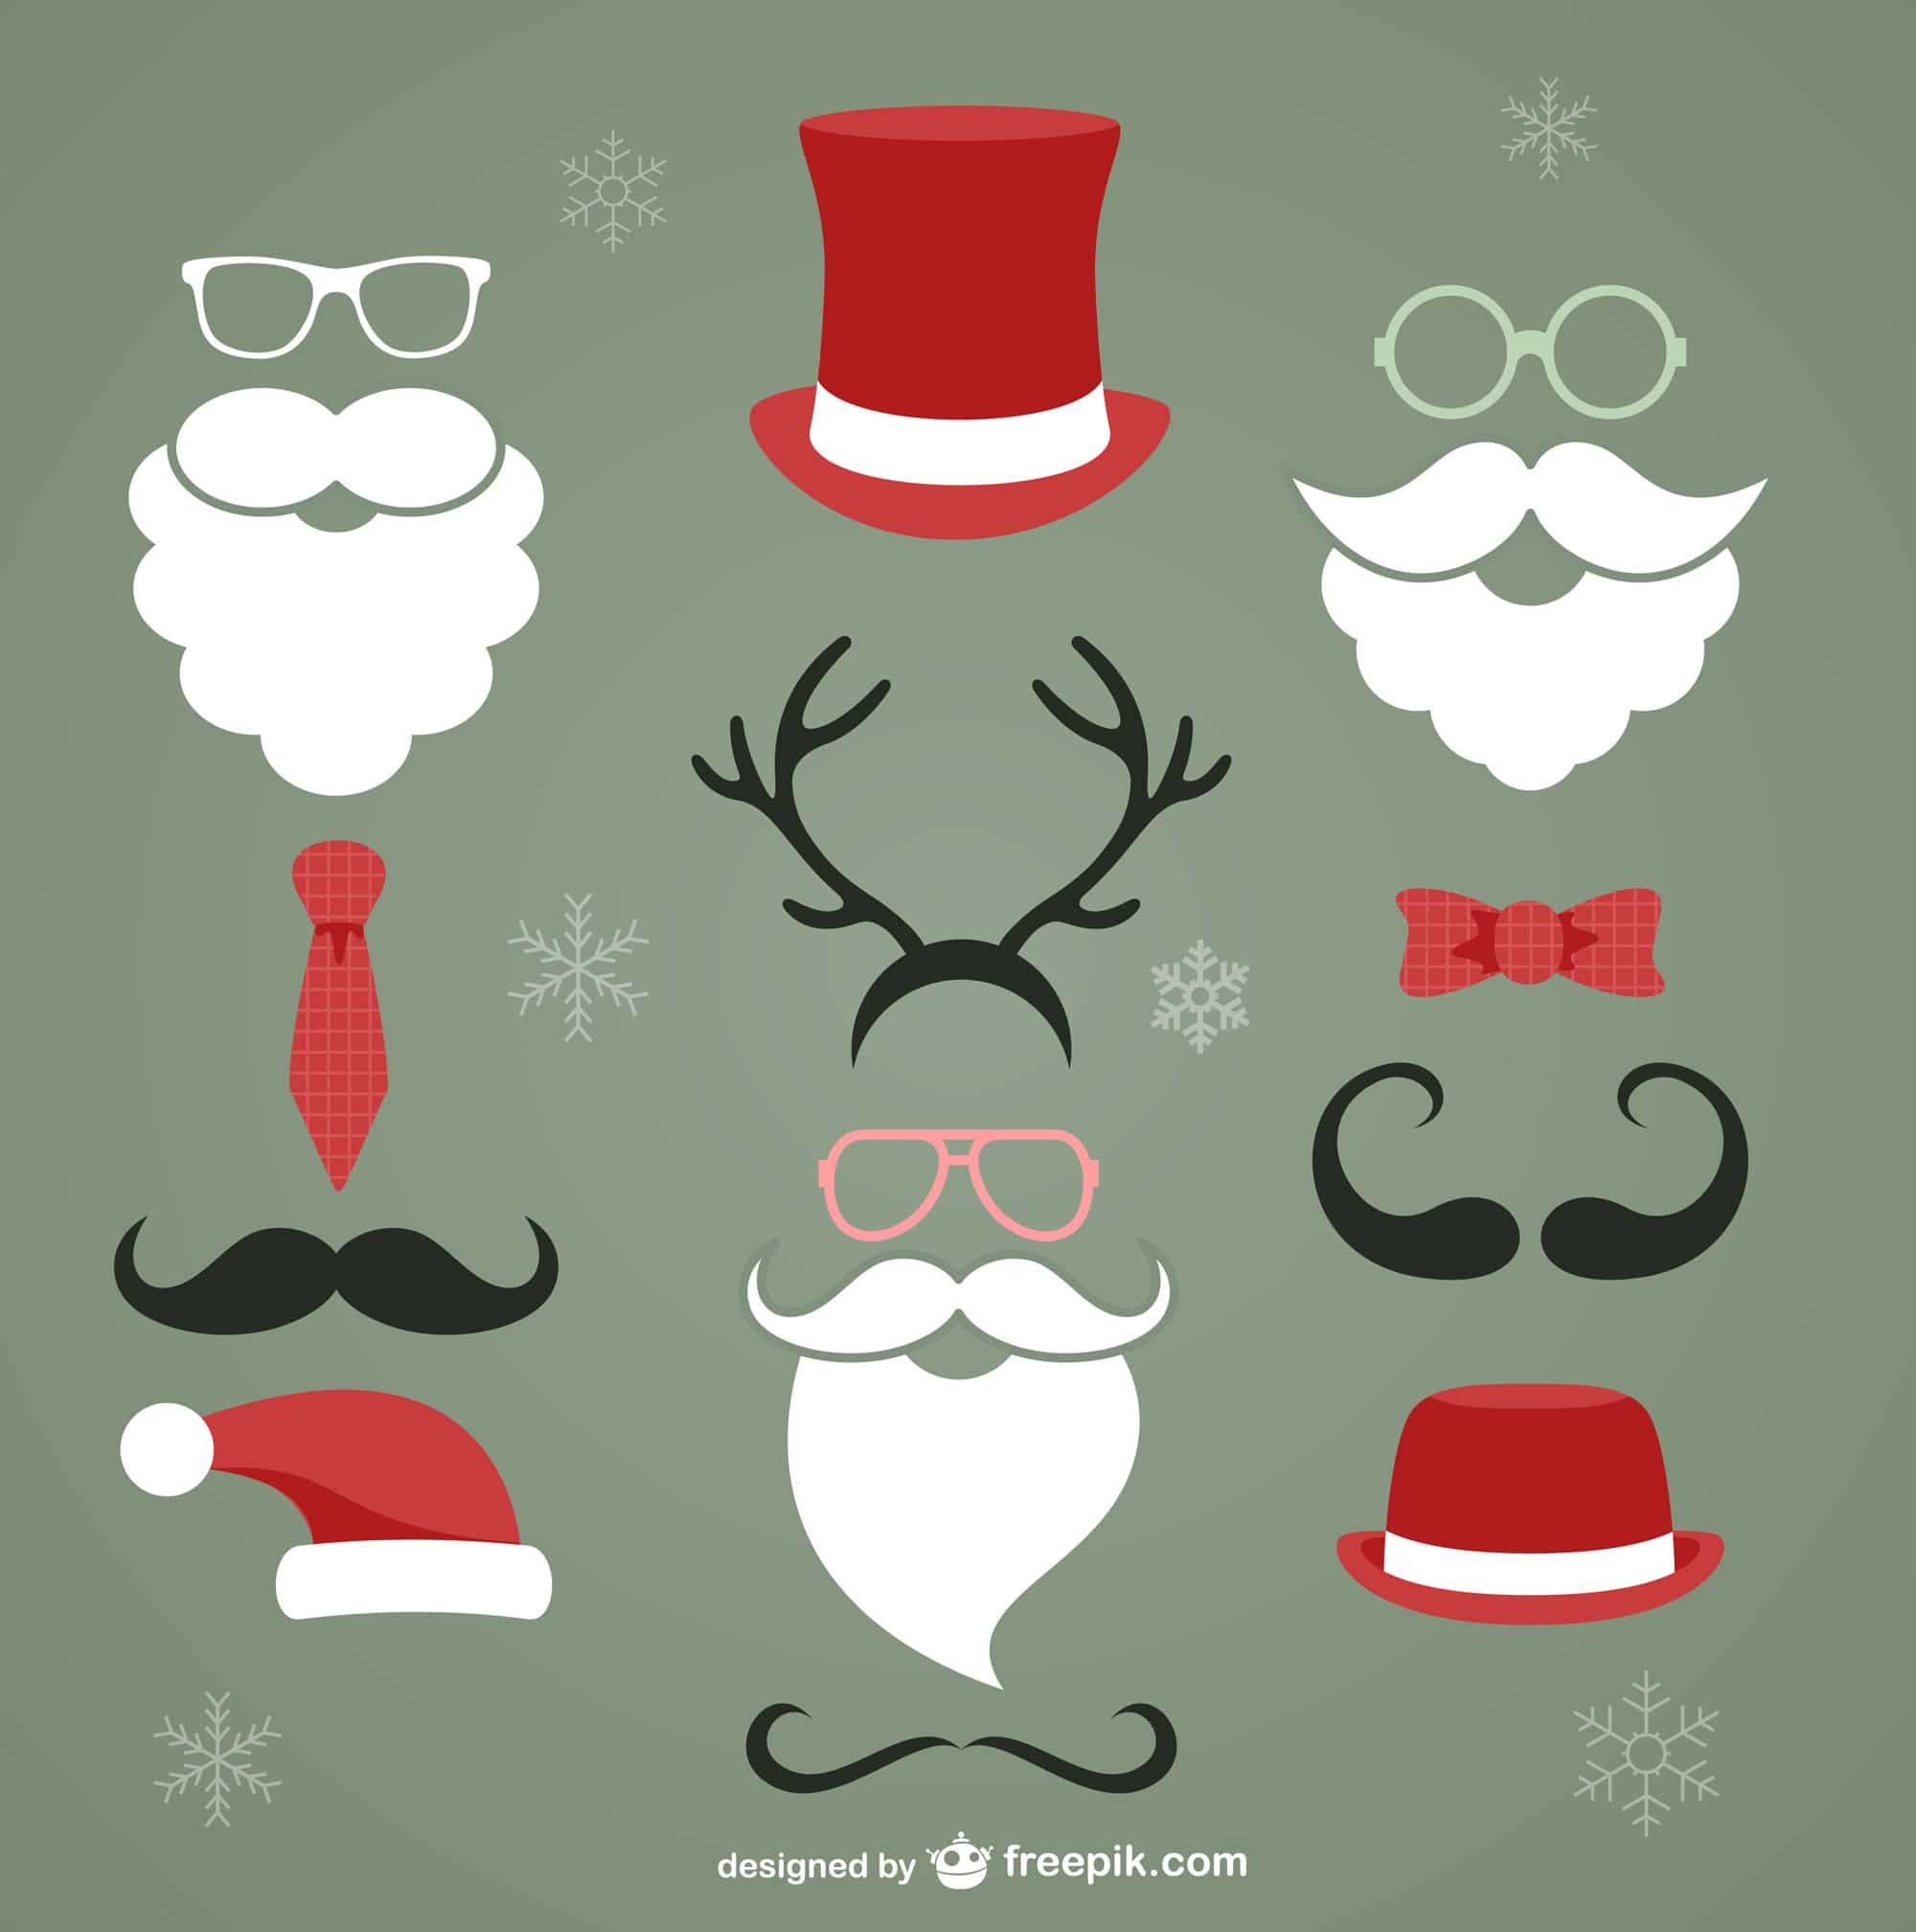 Christmas hipster elements